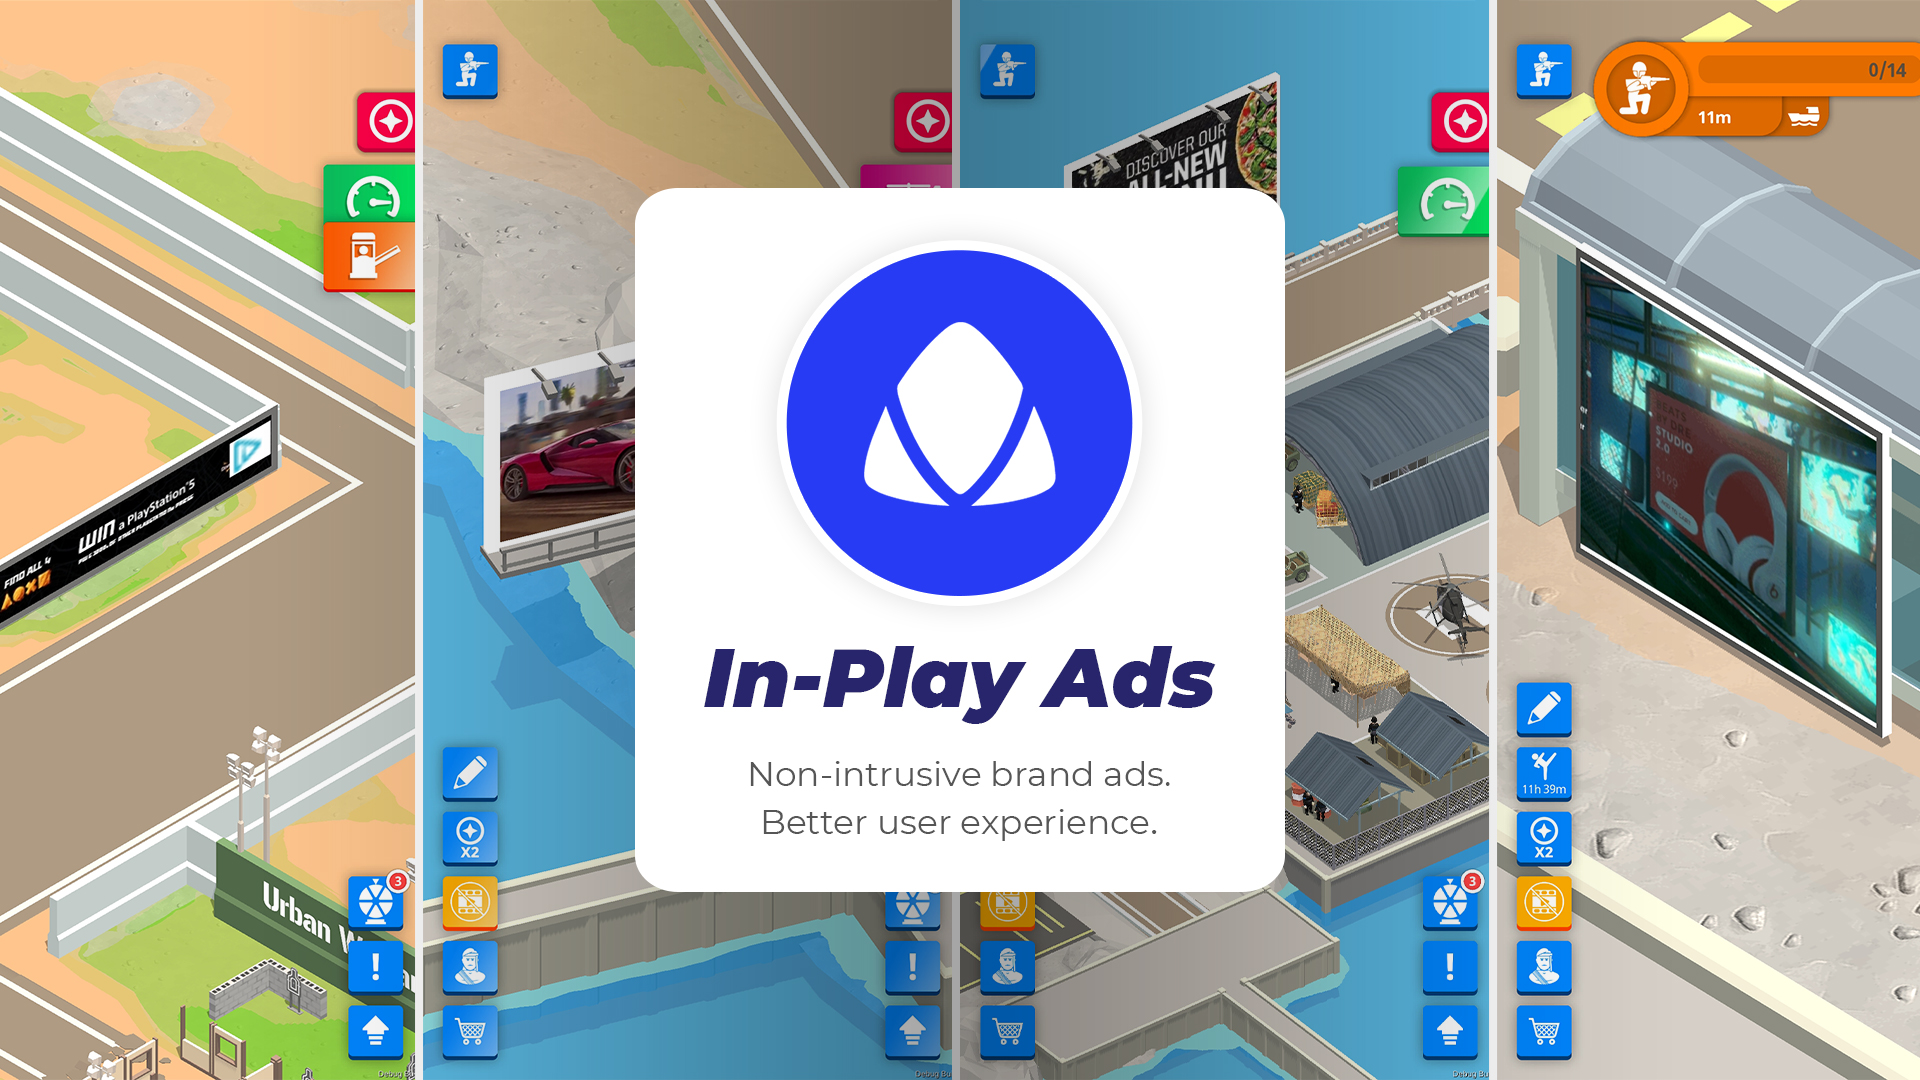 Adverty launches industry-first streaming video technology for In-Play ads